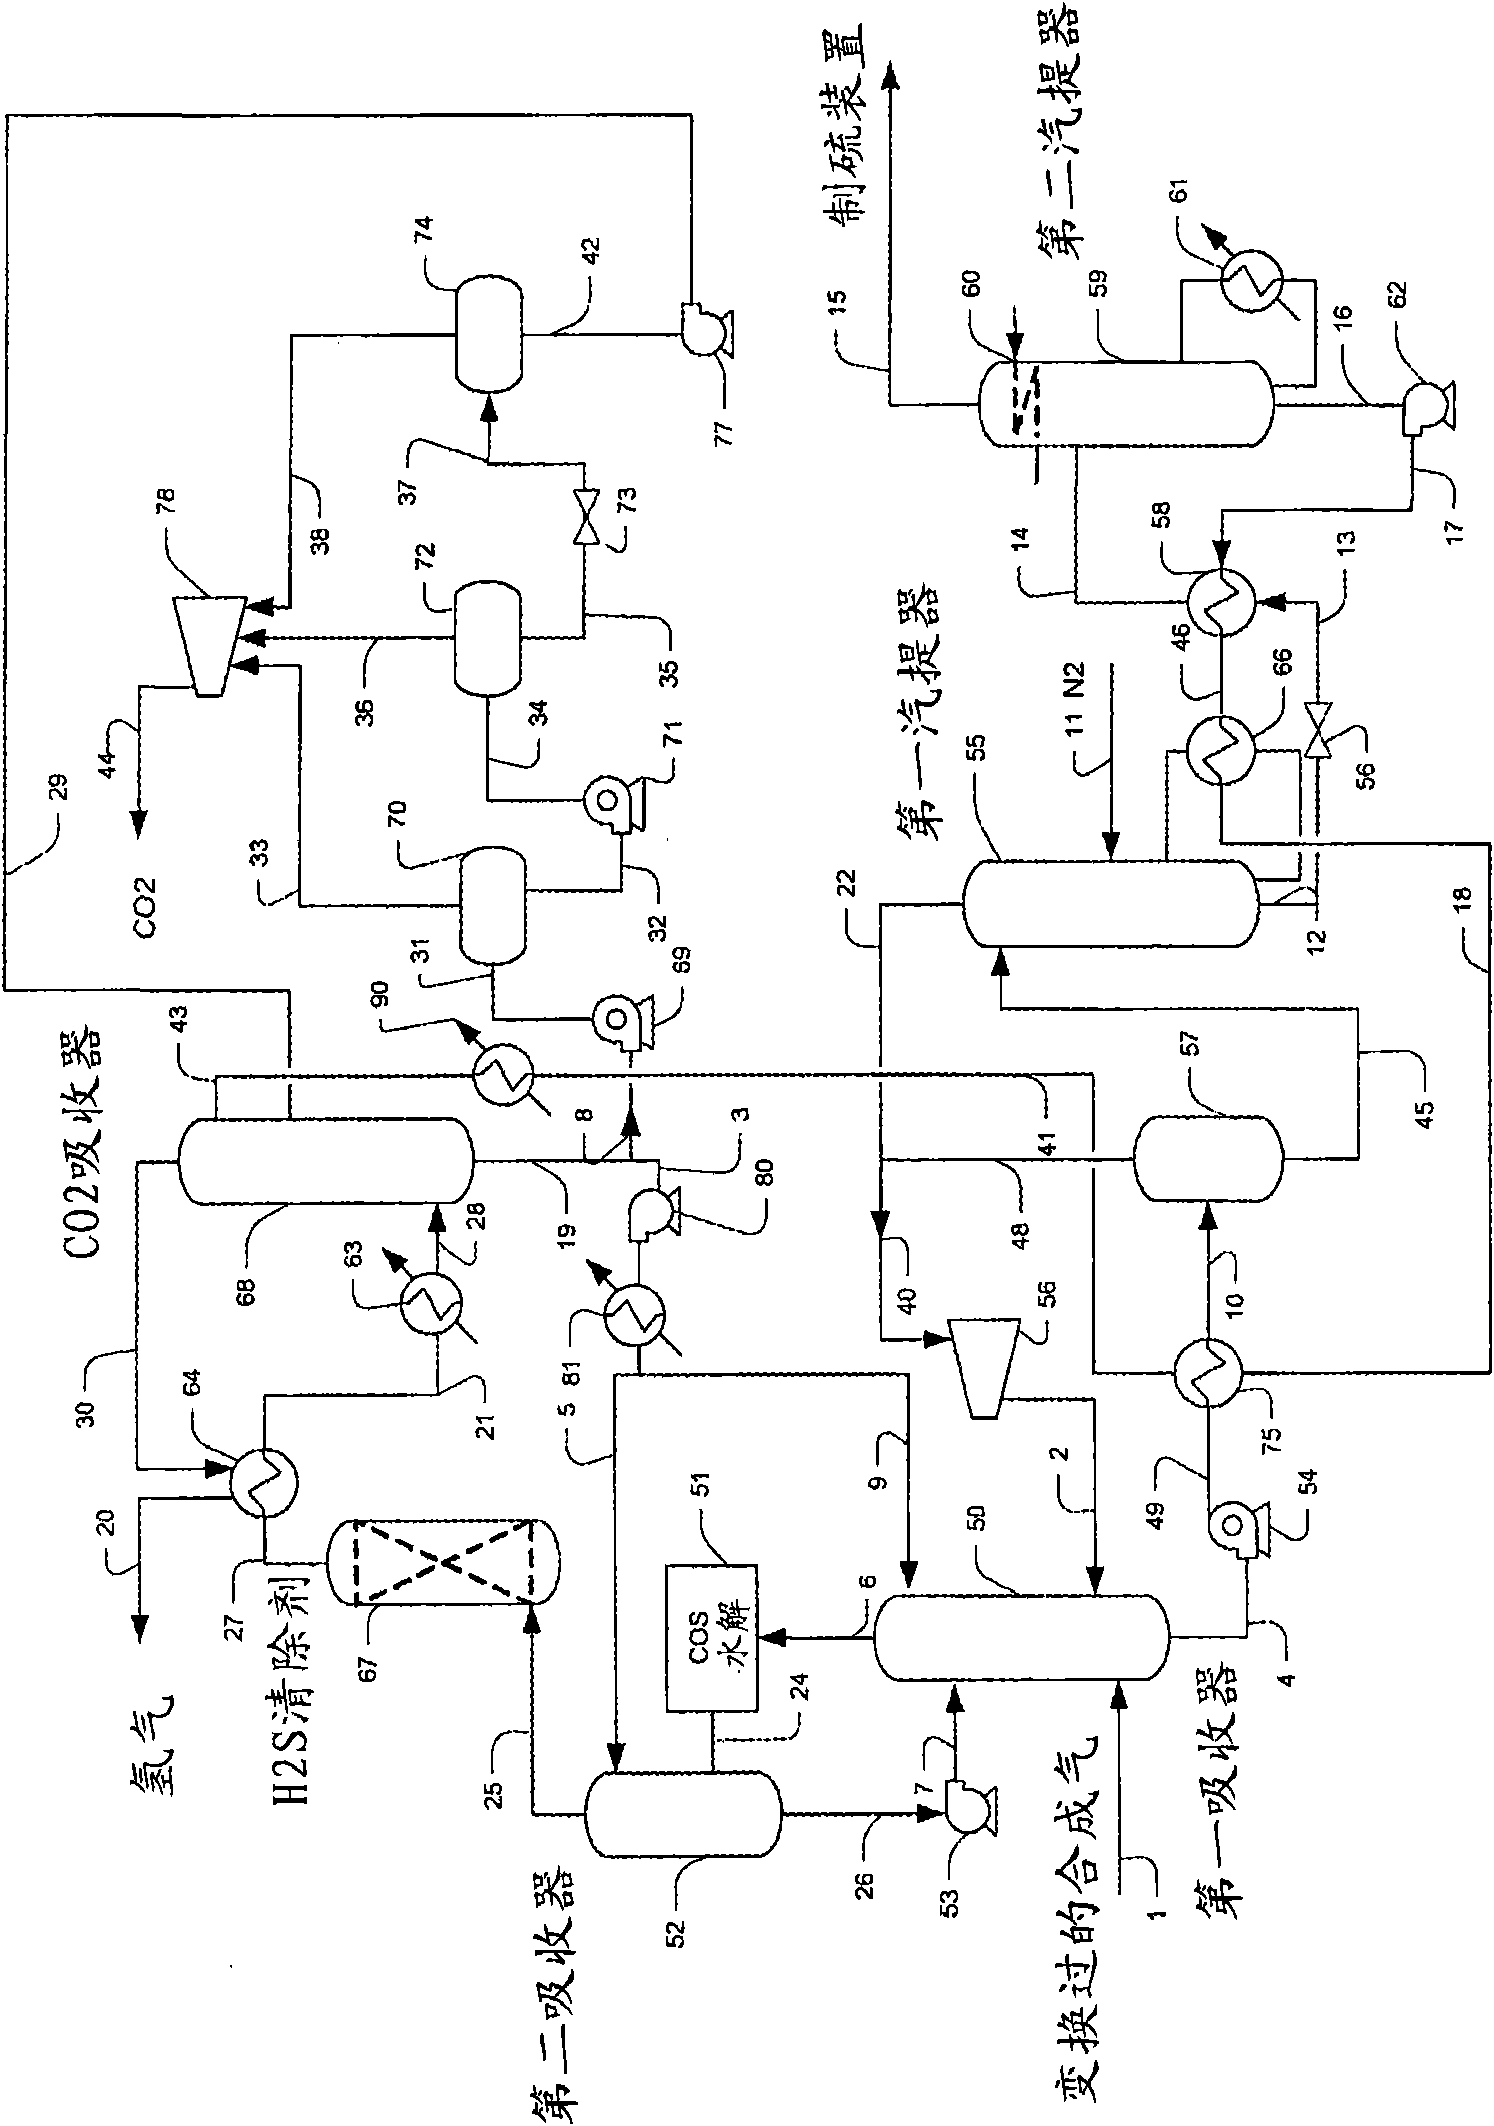 Configurations and methods for carbon dioxide and hydrogen production from gasification streams